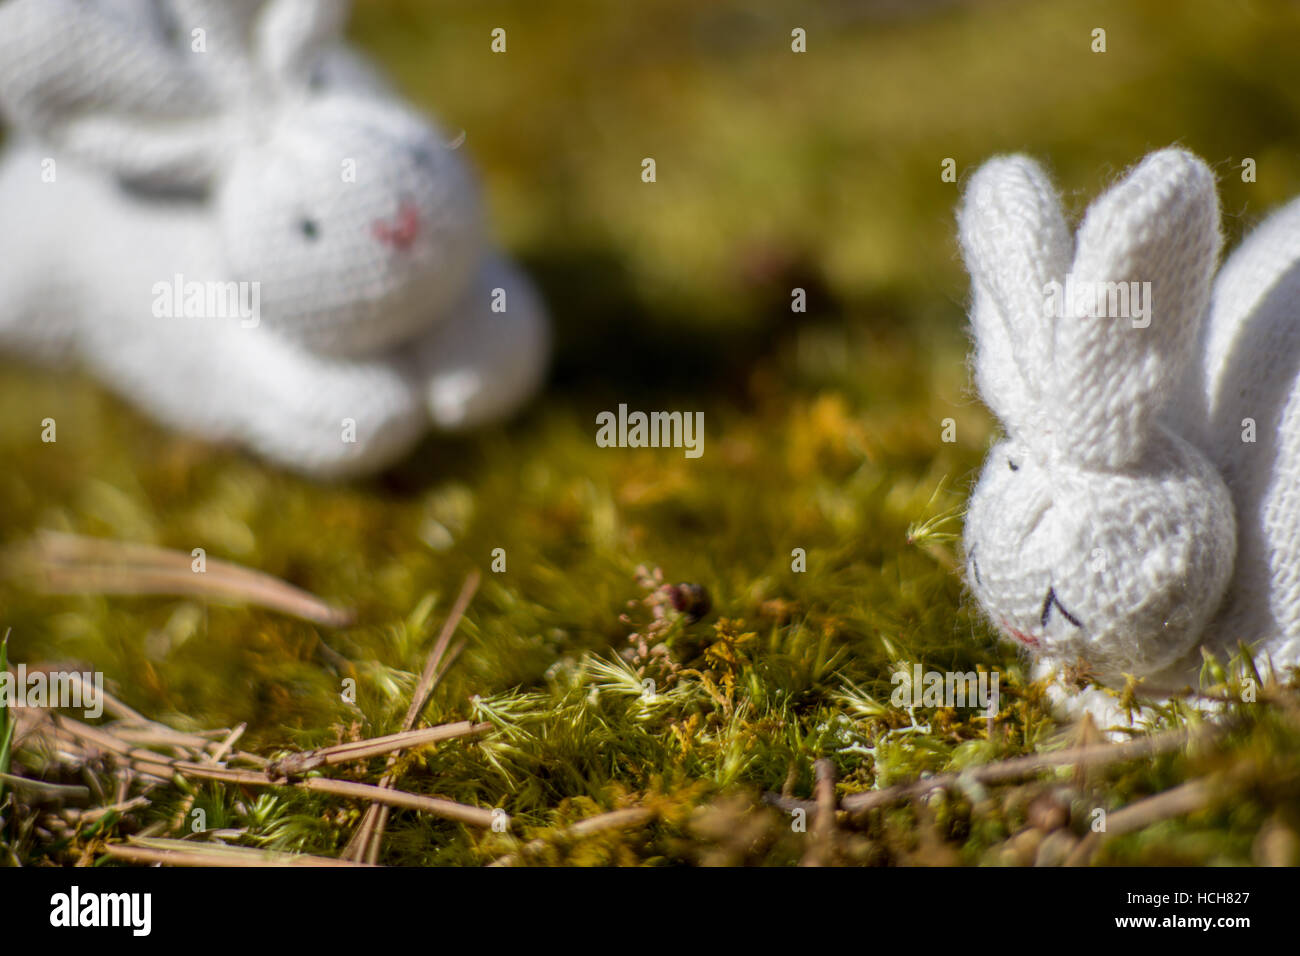 Two white rabbit stuffed toys on a mossy ground Stock Photo